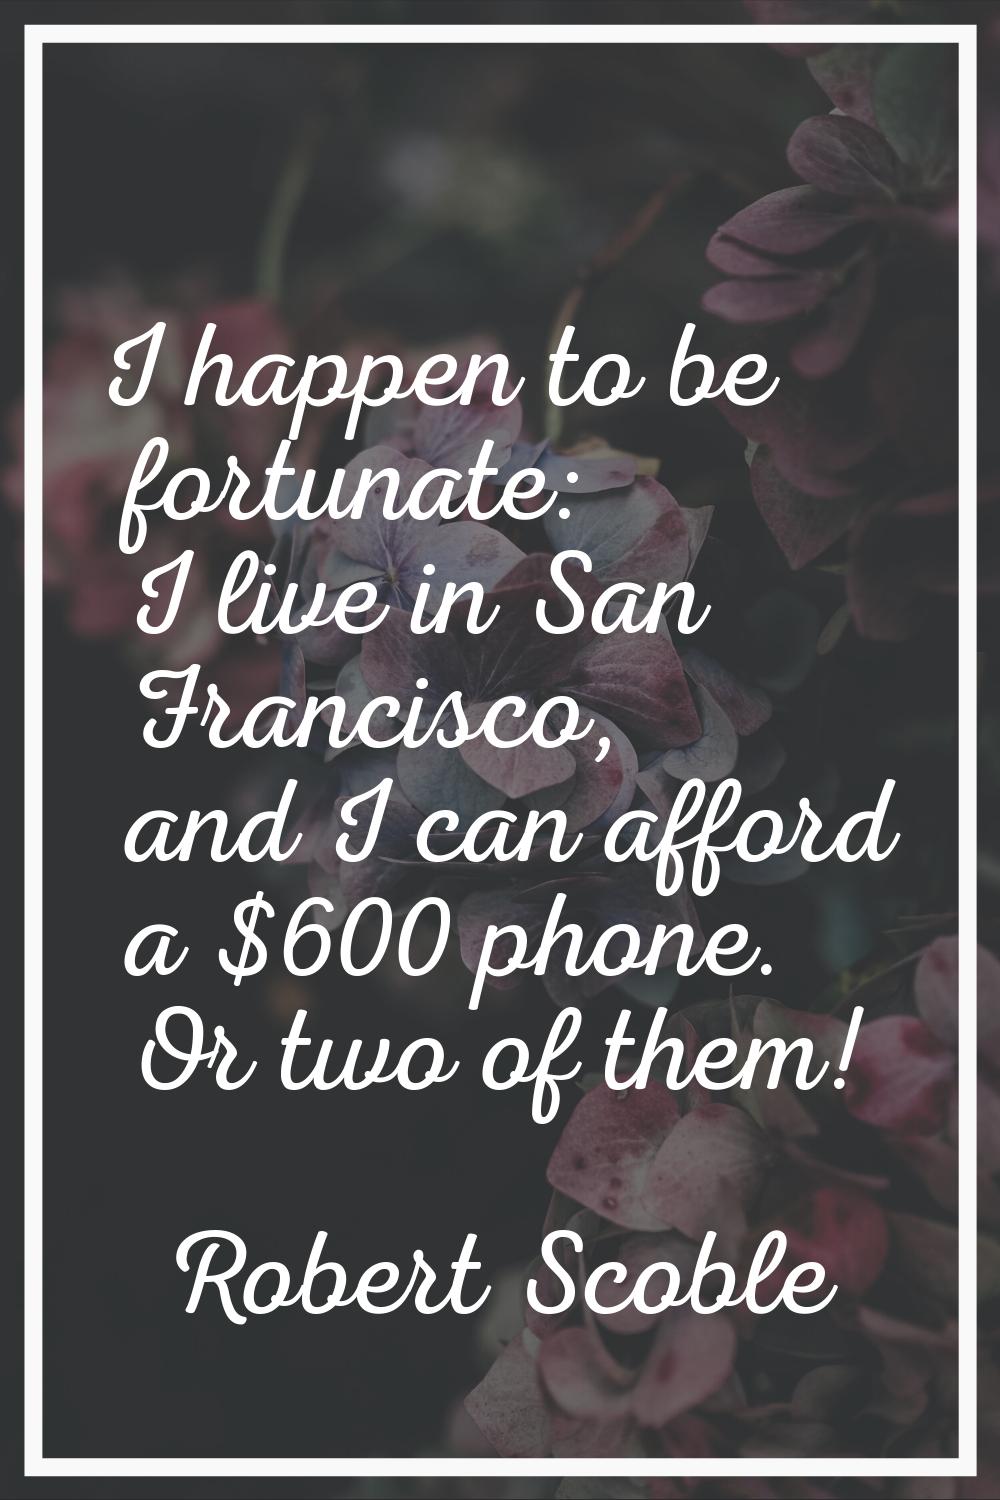 I happen to be fortunate: I live in San Francisco, and I can afford a $600 phone. Or two of them!